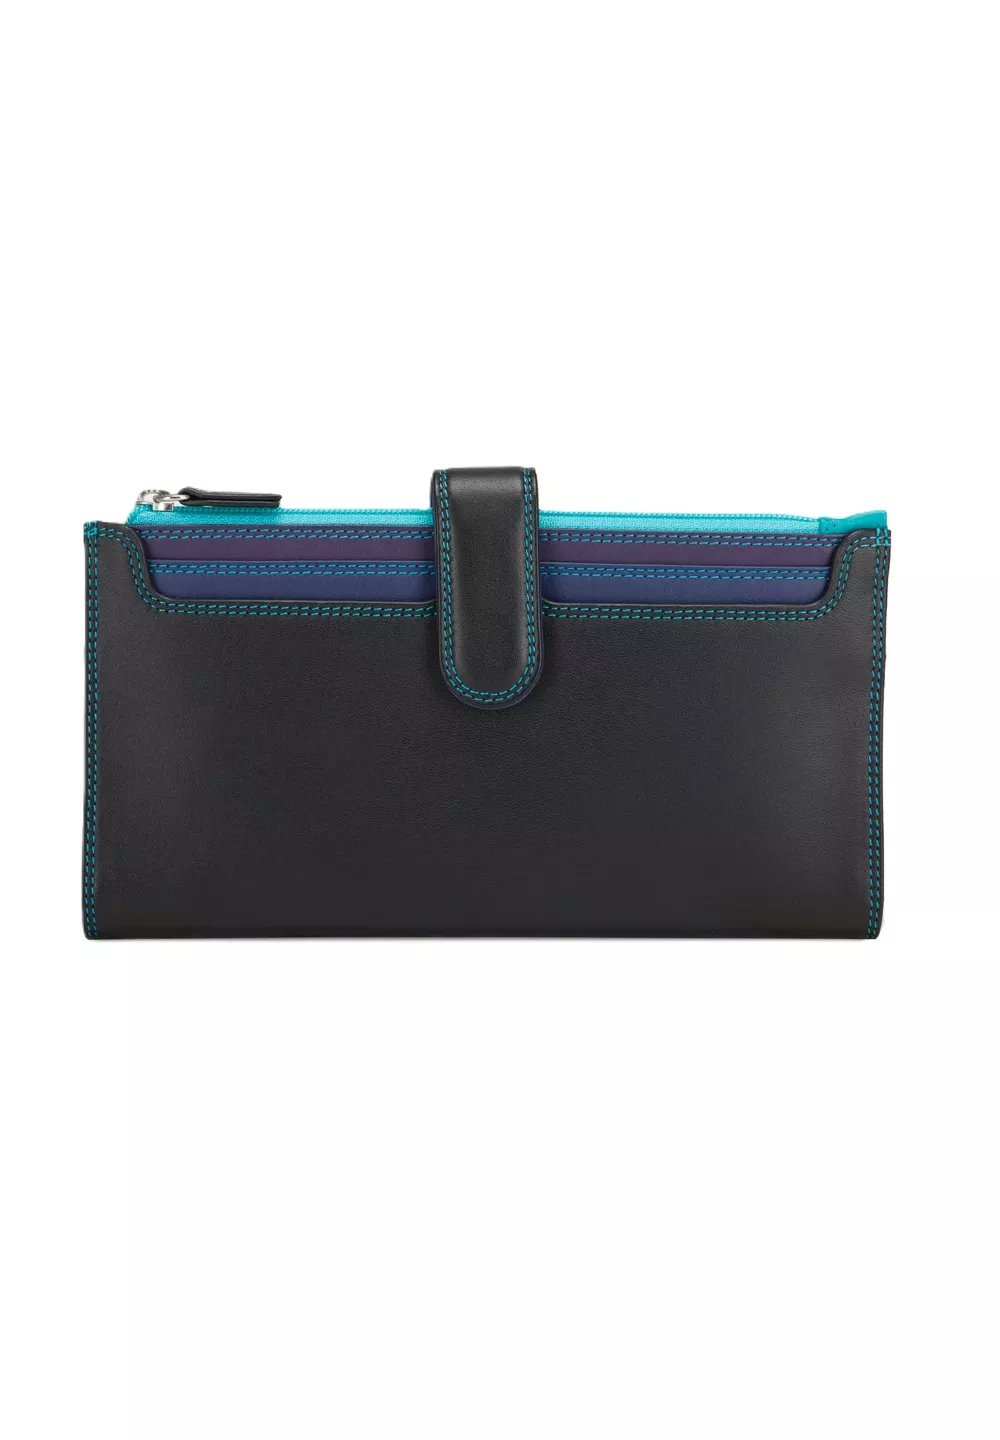 Mywalit Continental Wallet Black 12774